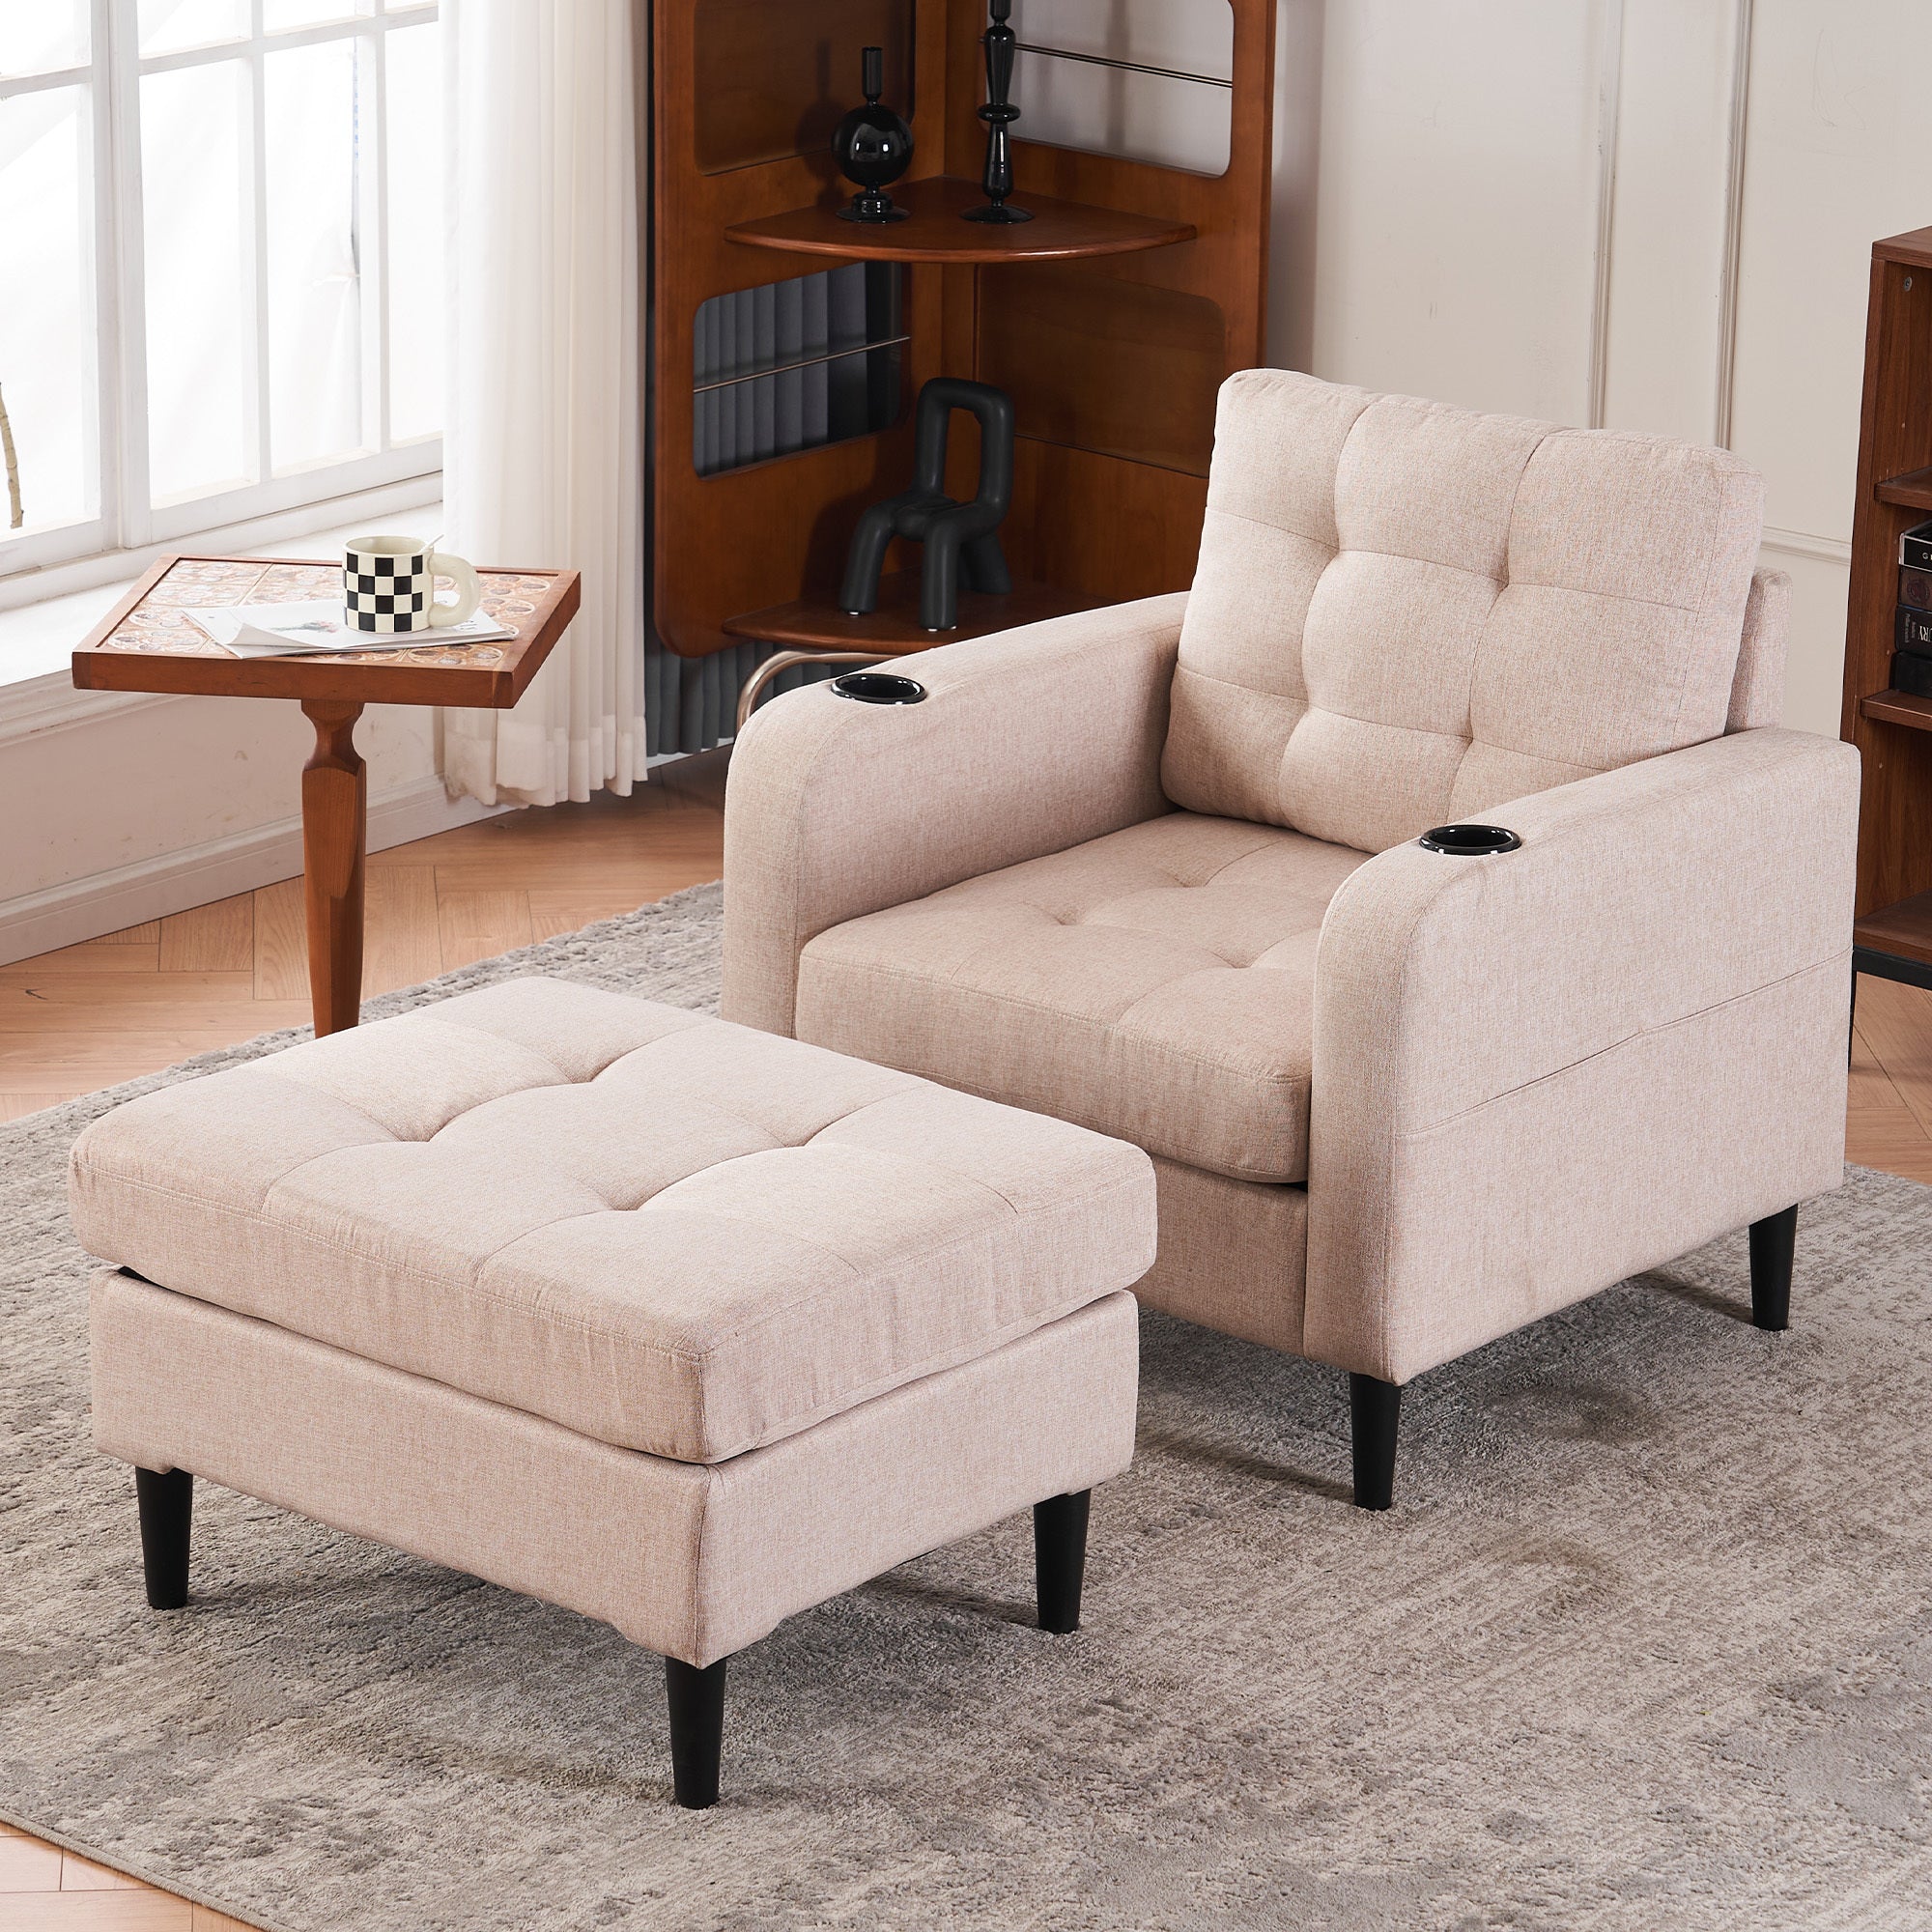 🆓🚛 Upholstered Armchair and Storage Ottoman Set - Comfortable Single Sofa With Cup Holders and Tufted Detailing, Beige